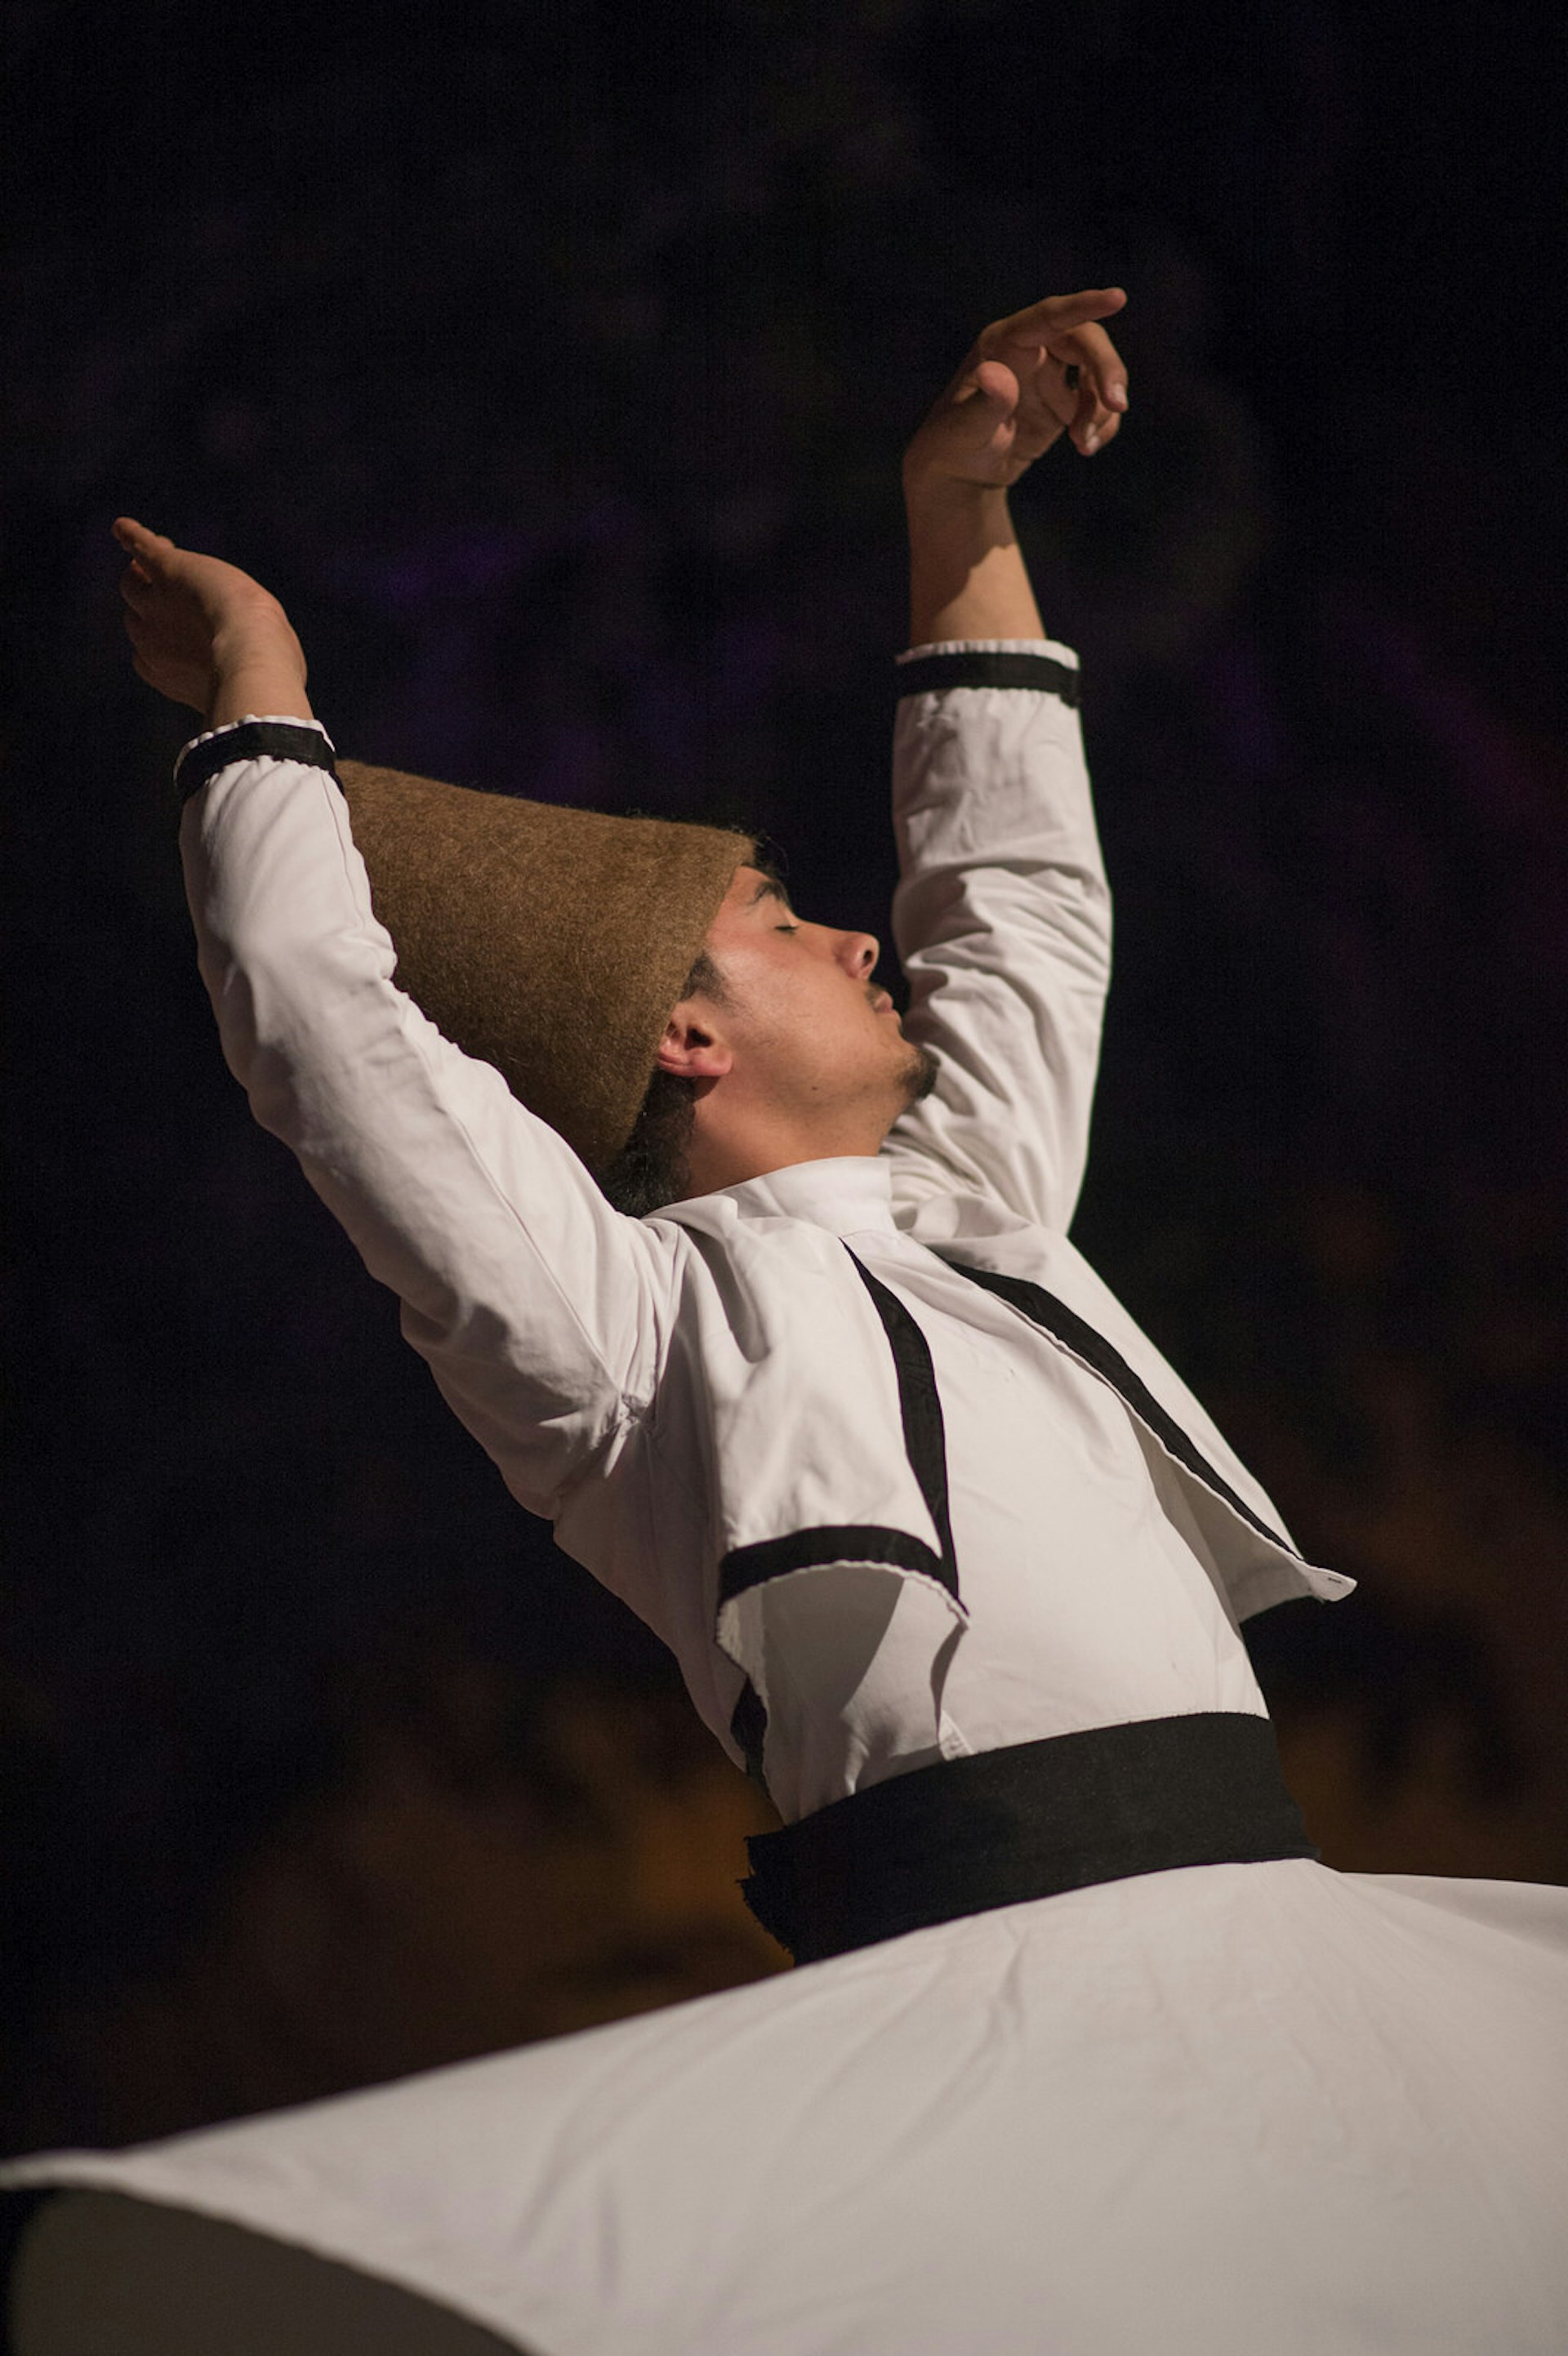 Dervish from a Turkish brotherhood, the Khalwatiyya, during the Festival of Sufi culture in Fez, Morocco